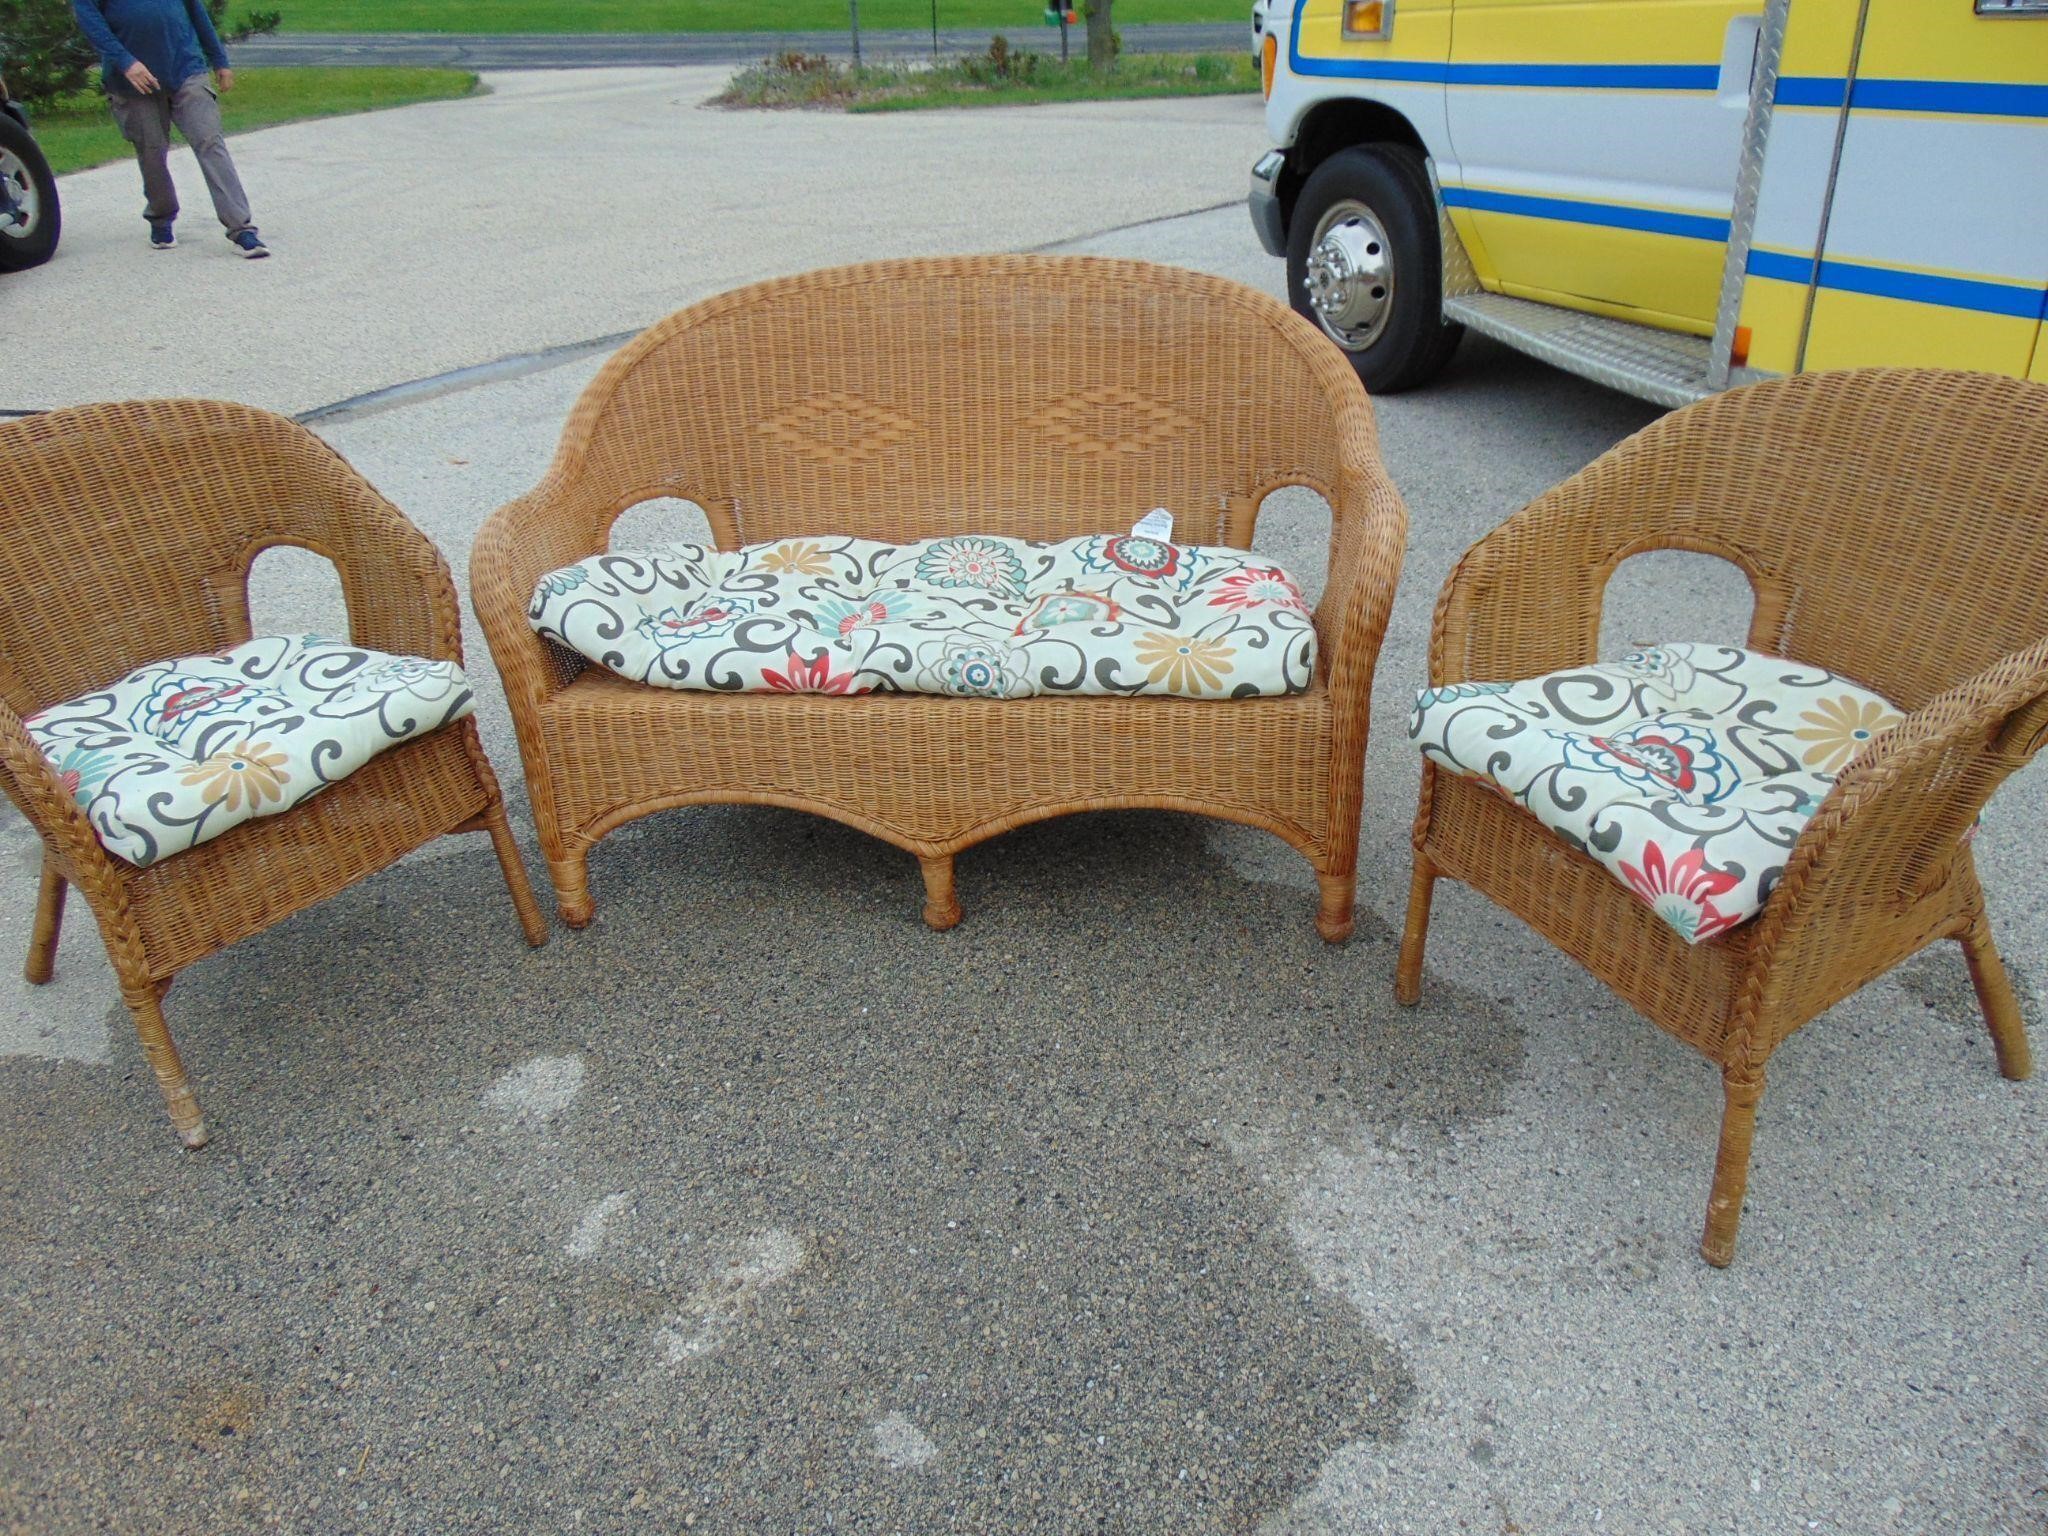 Three Piece Wicker Set, Loveseat and 2 Chairs